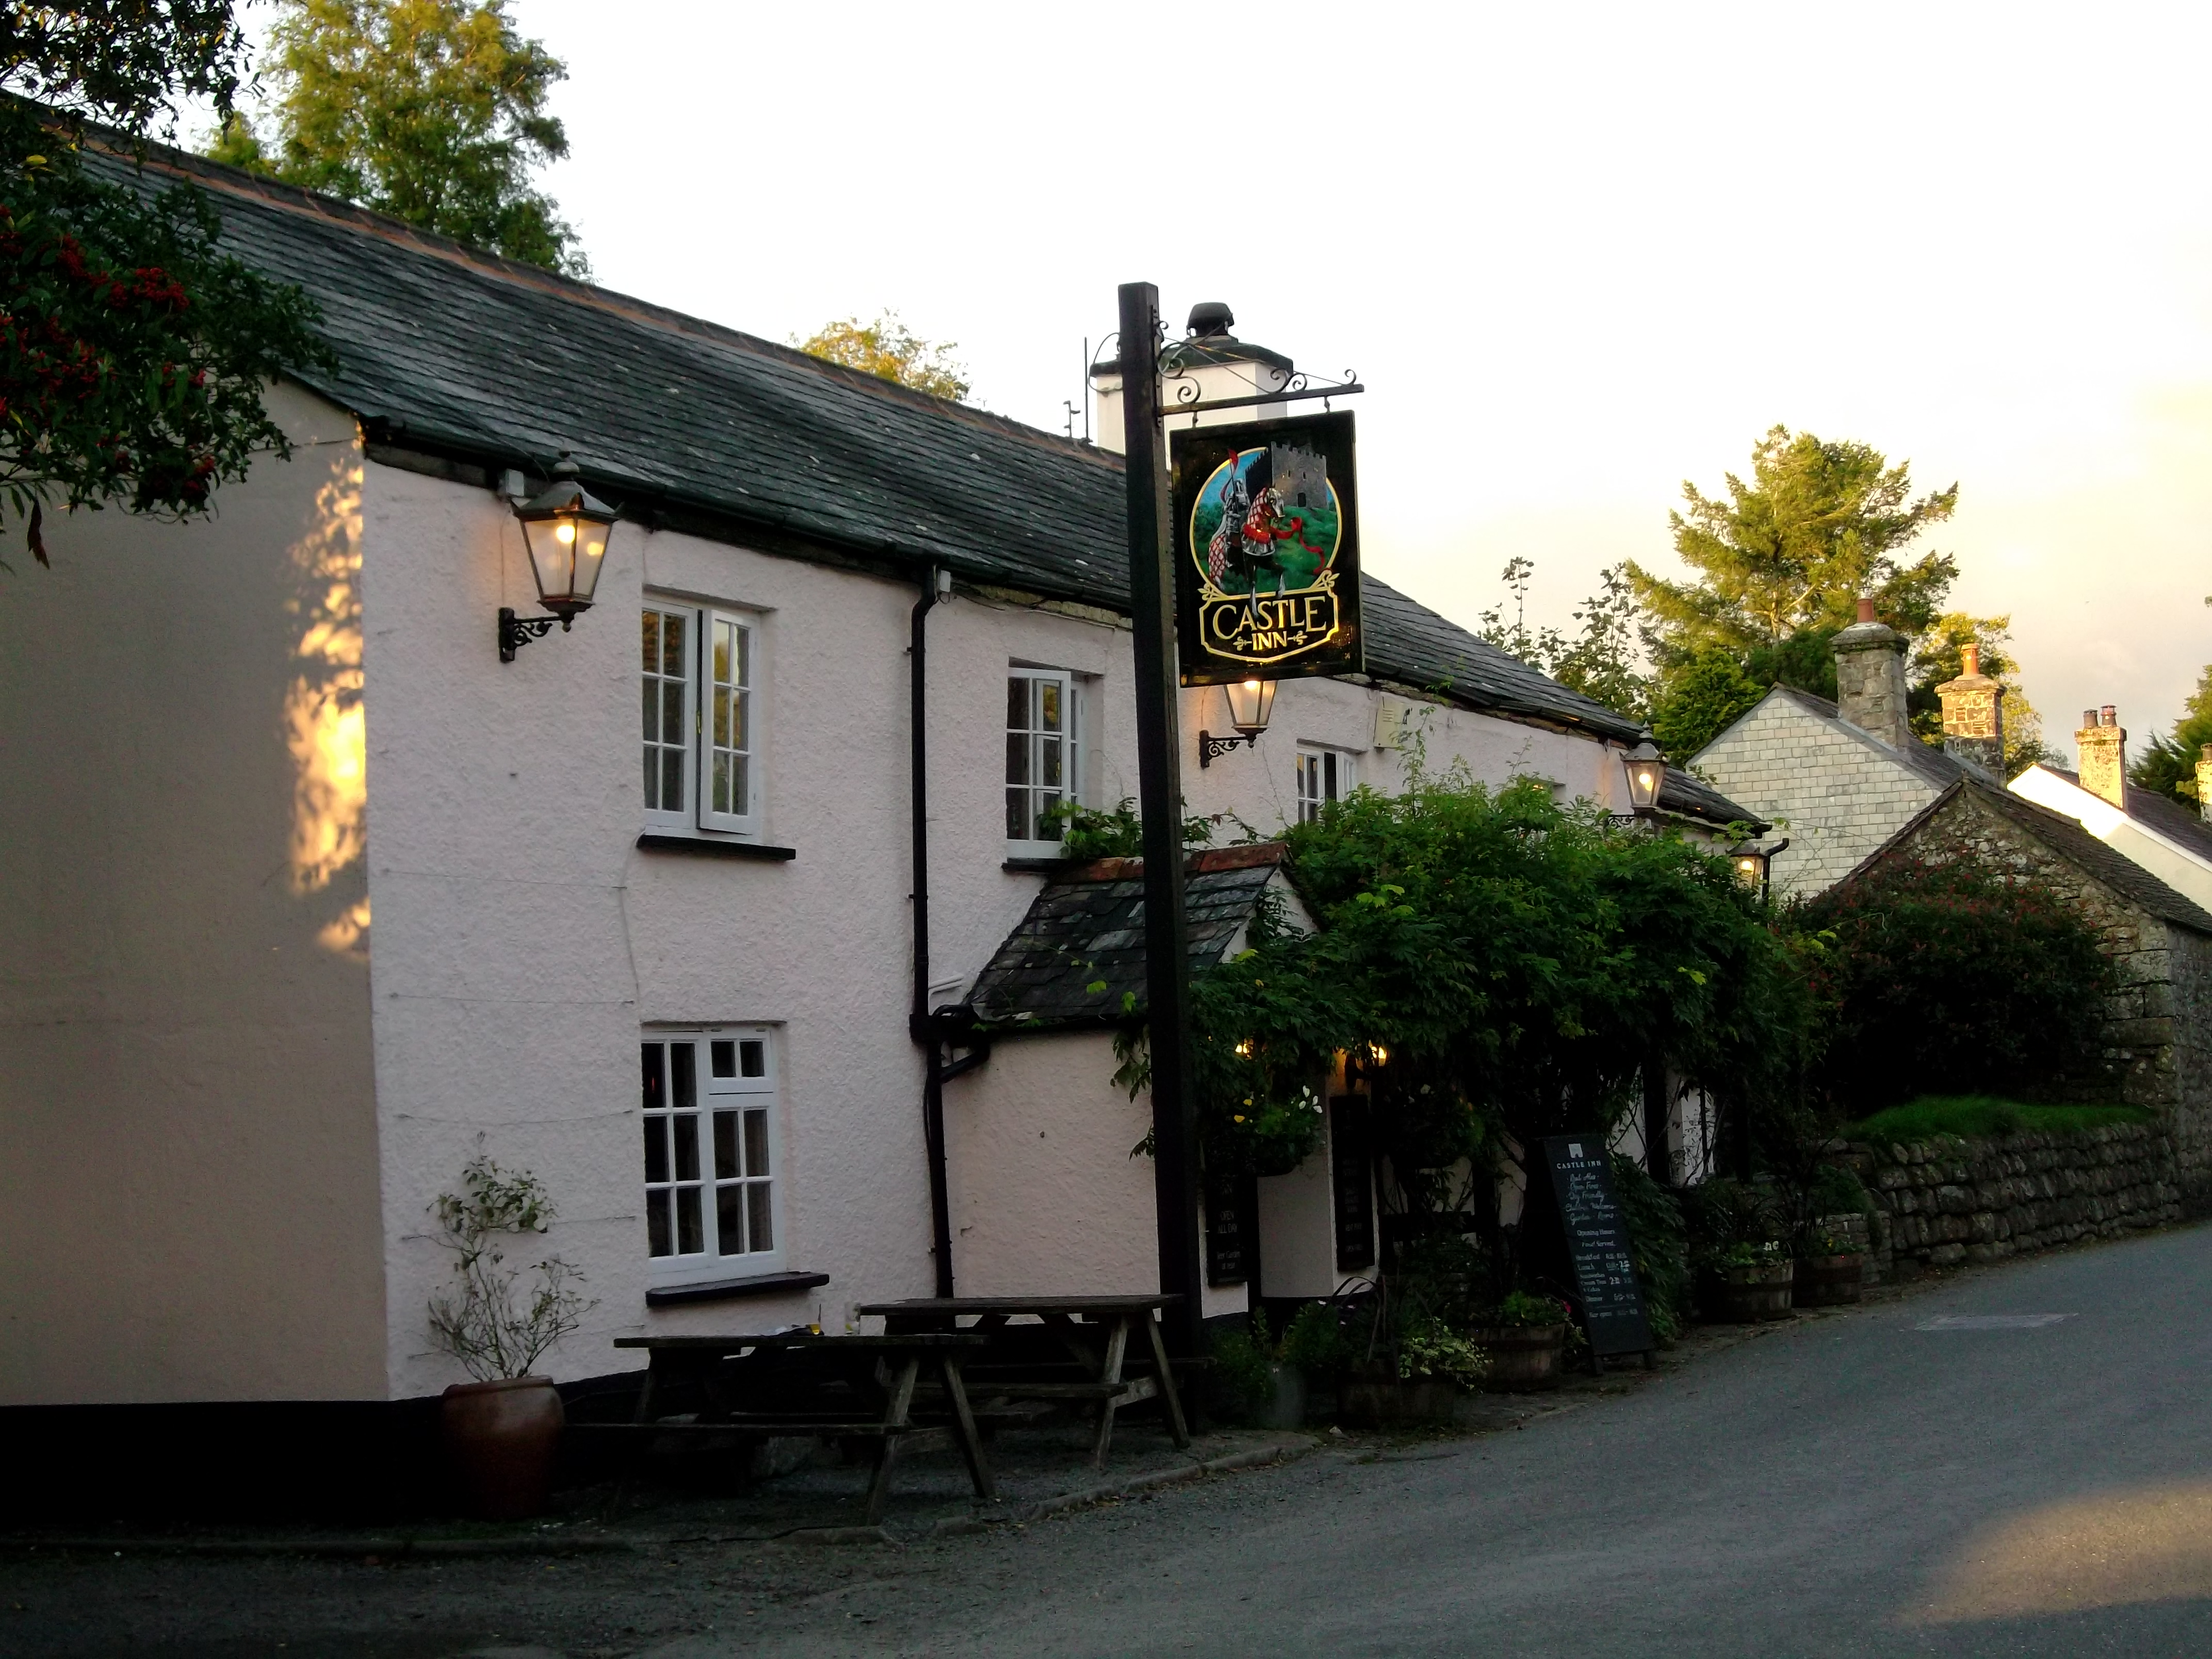 Lydford has two pubs with hotel rooms at either end of the village plus a third hotel in between